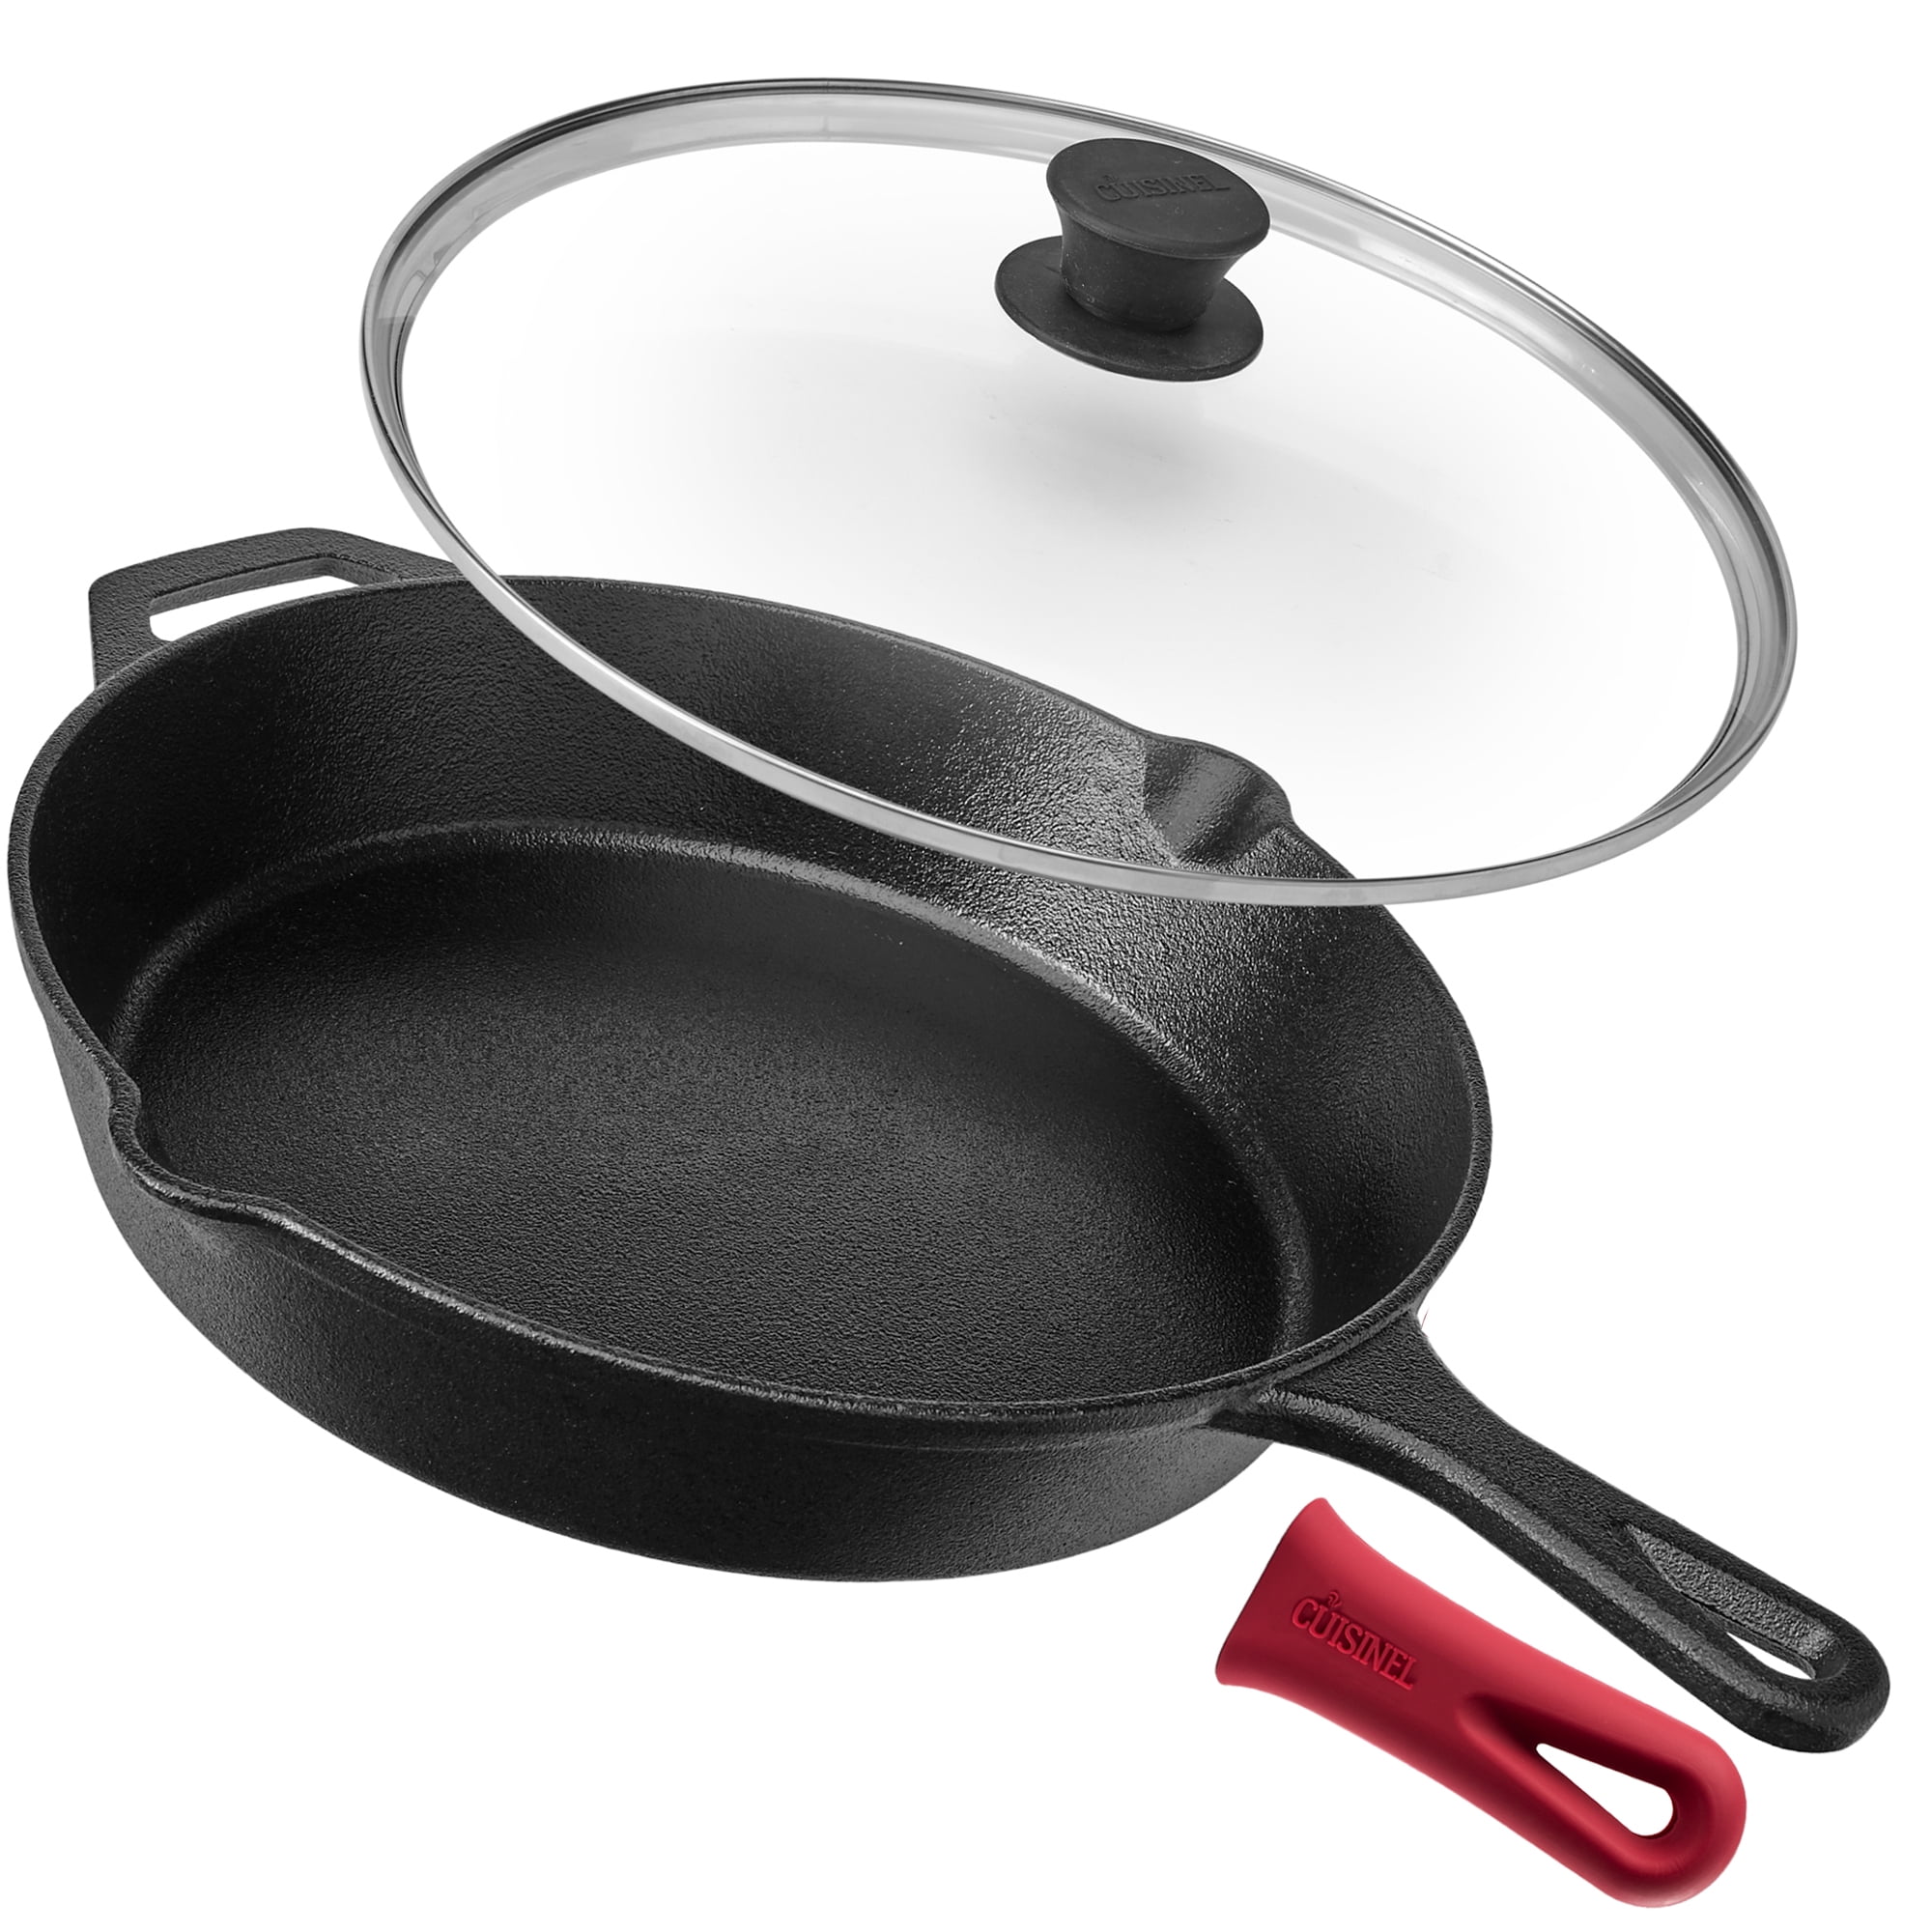 Pre-Seasoned Cast Iron Skillet 12 inch Non-Stick Cooking Frying Pan Pizza Pan 